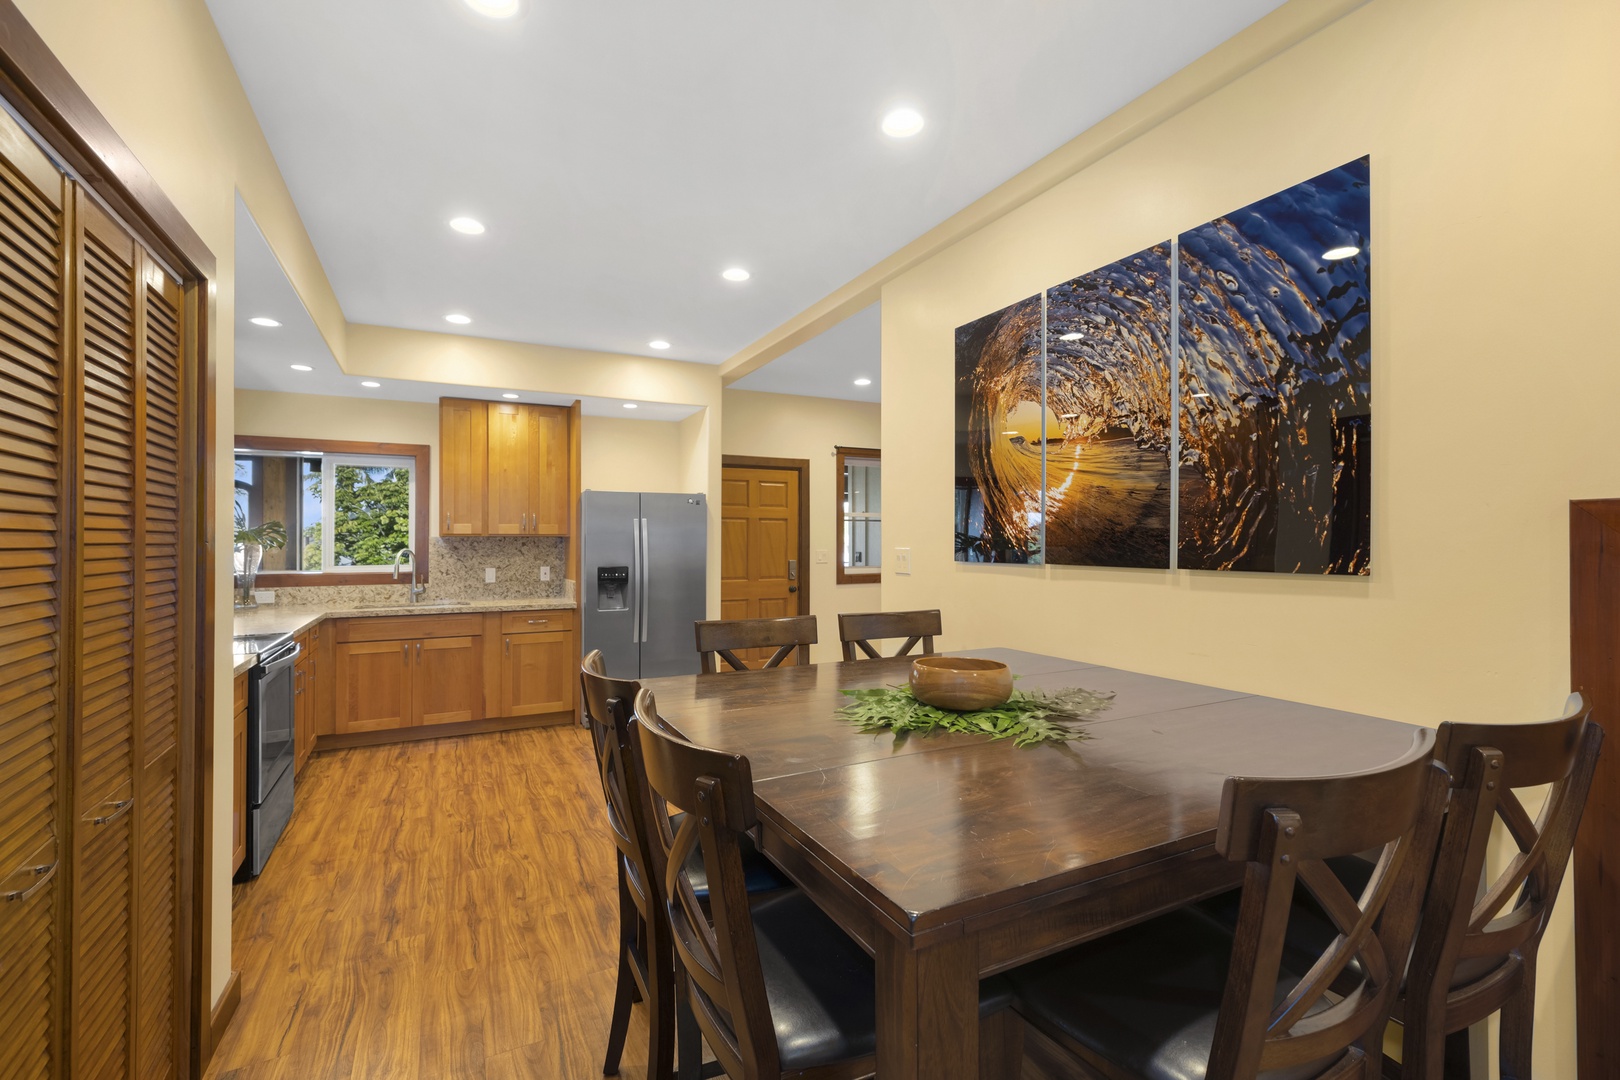 Haleiwa Vacation Rentals, Waimea Dream - The downstairs kitchen flows into another dining area.